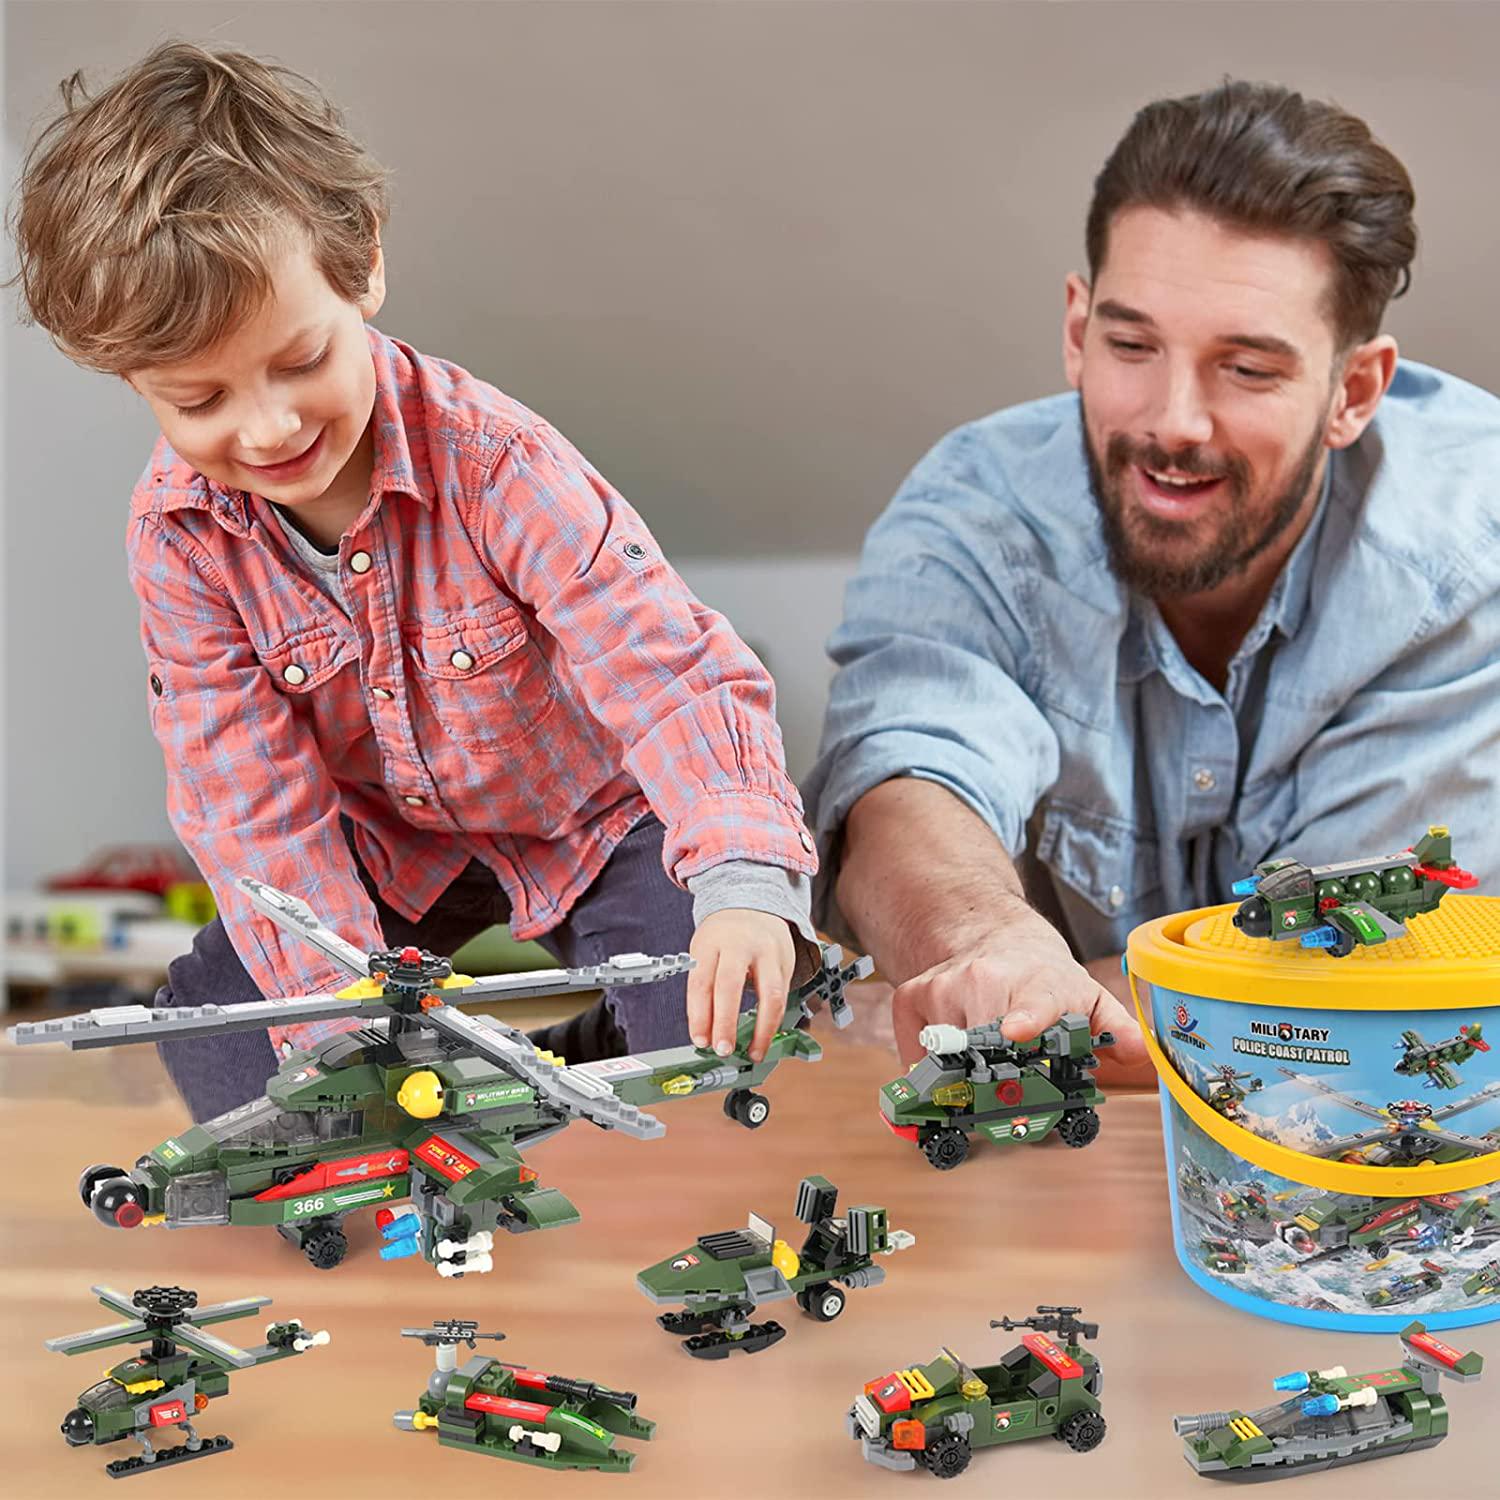 EP EXERCISE N PLAY, Military Helicopter Gunship Building Blocks, Army Military Helicopter Building Kit with Airplane Car Construction for Boys Girls 6 + (978 Pcs)